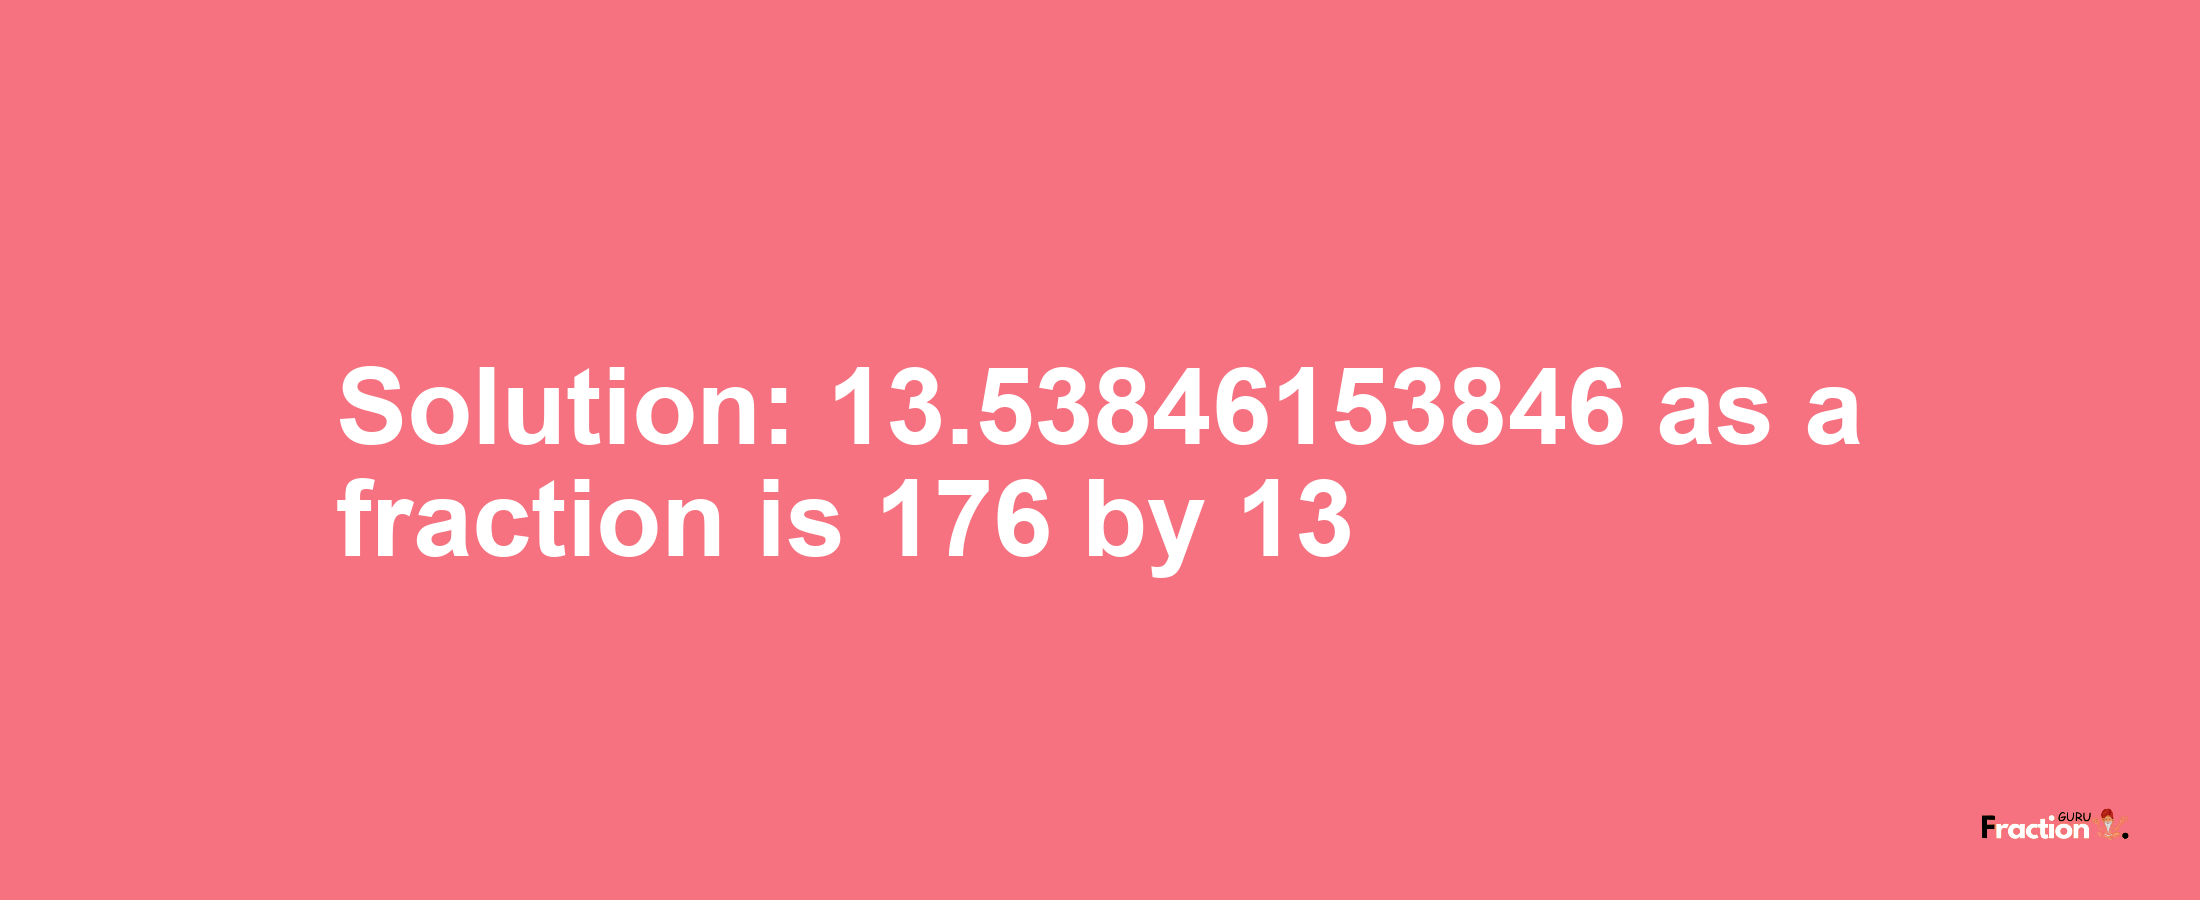 Solution:13.53846153846 as a fraction is 176/13